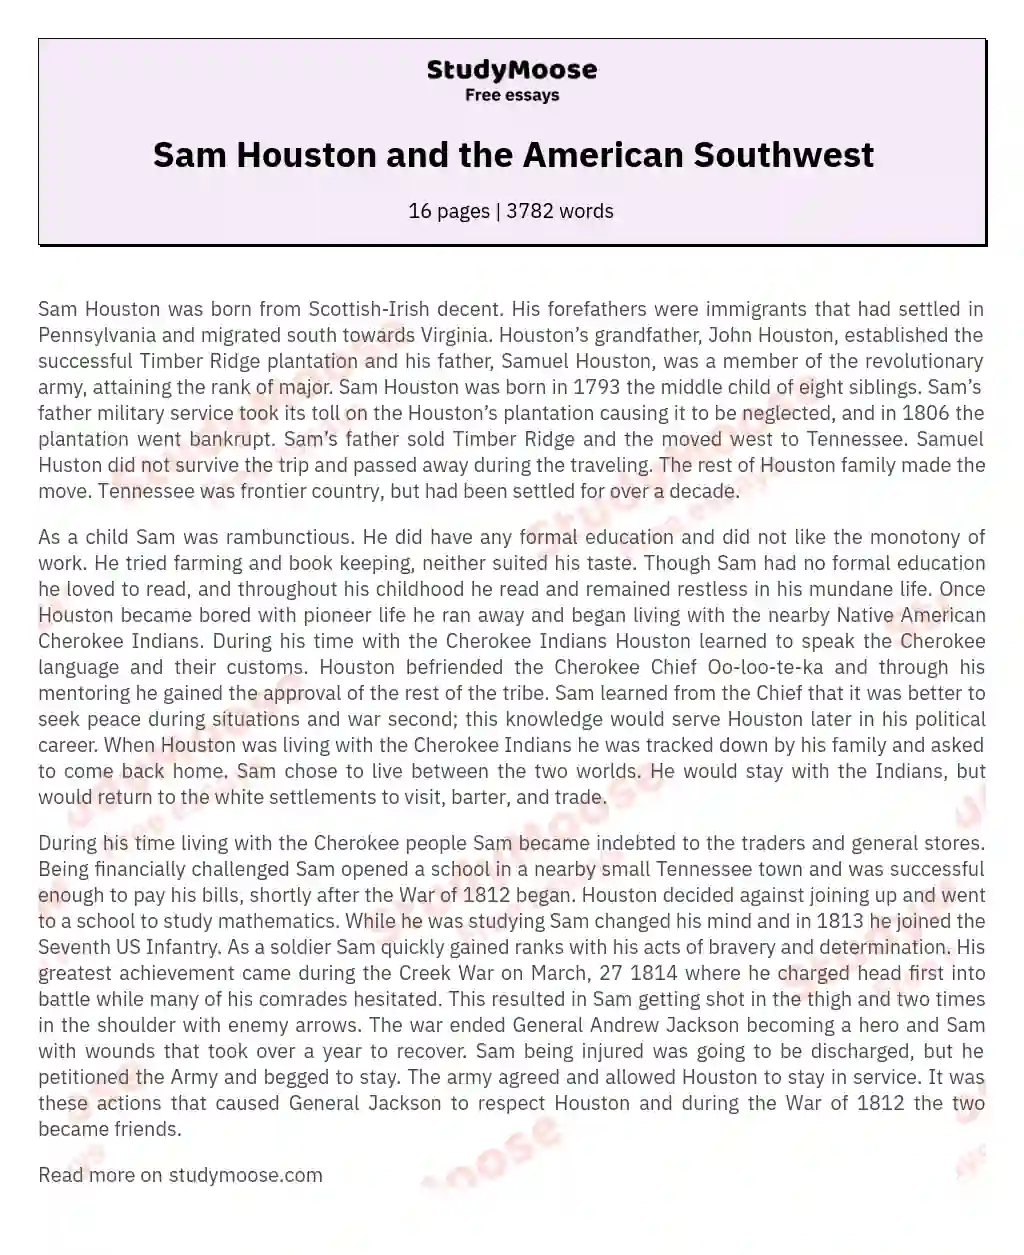 Sam Houston: From Frontier Life to Political Career essay